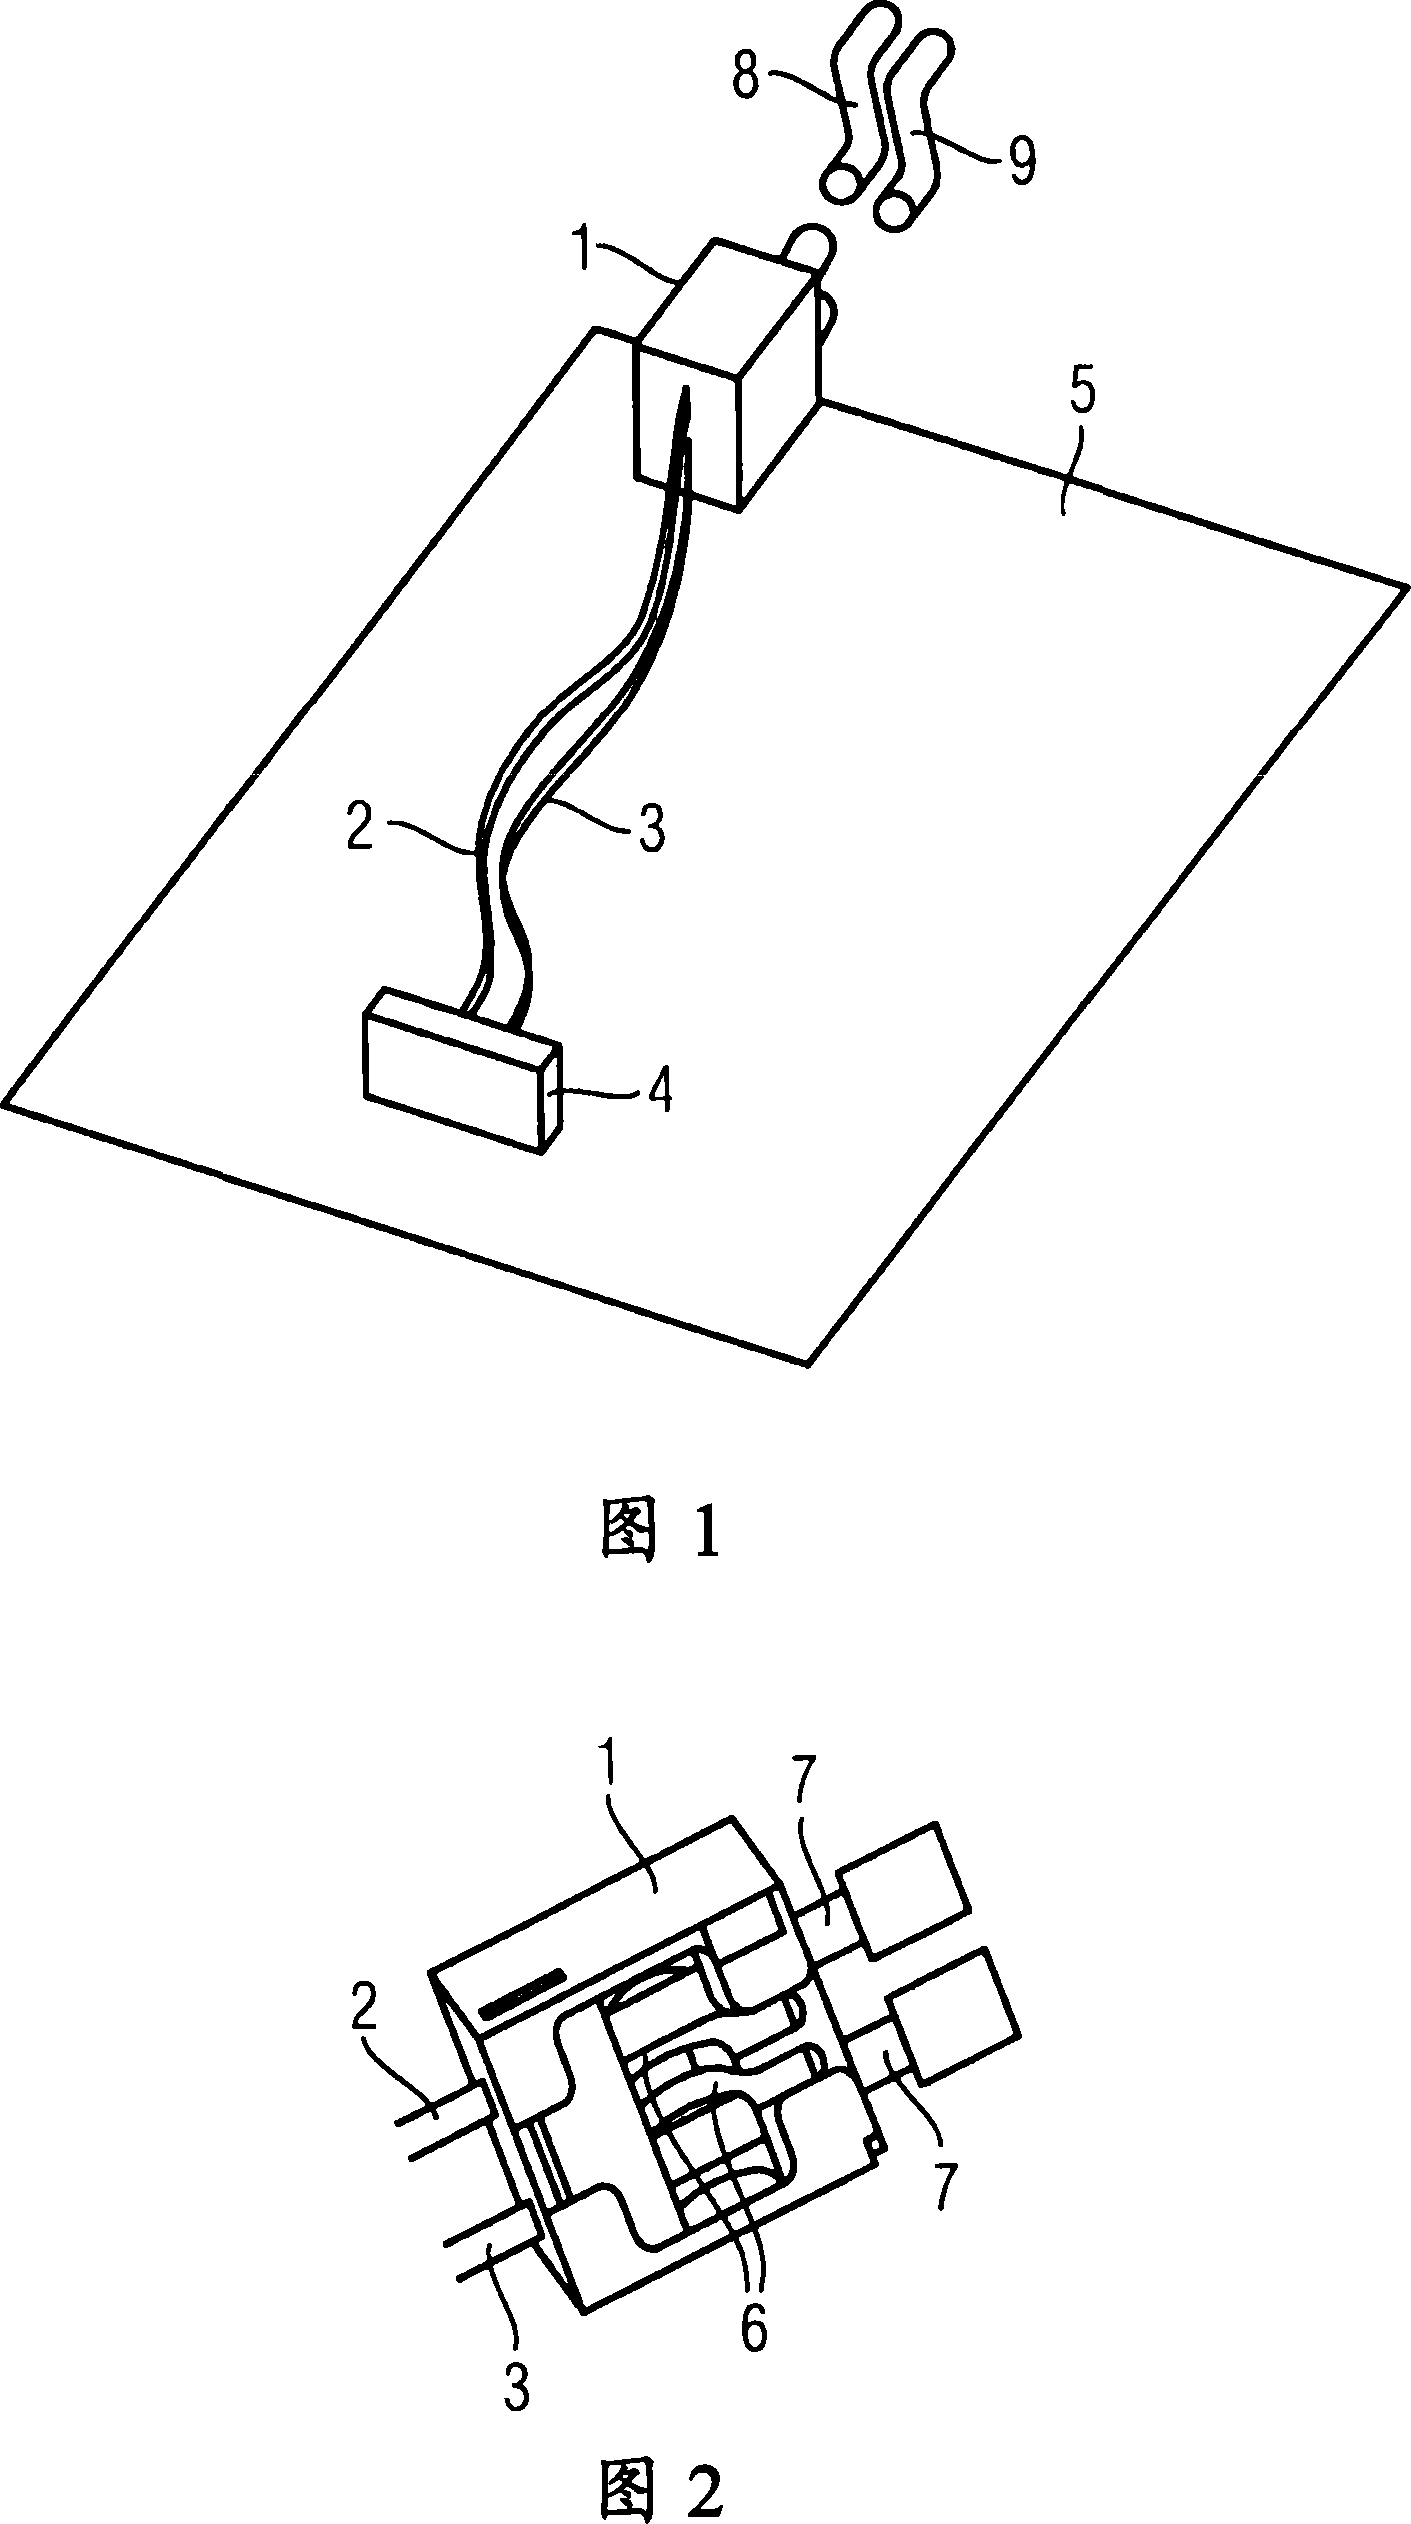 Connection unit for connecting an electronic device to an optical data bus